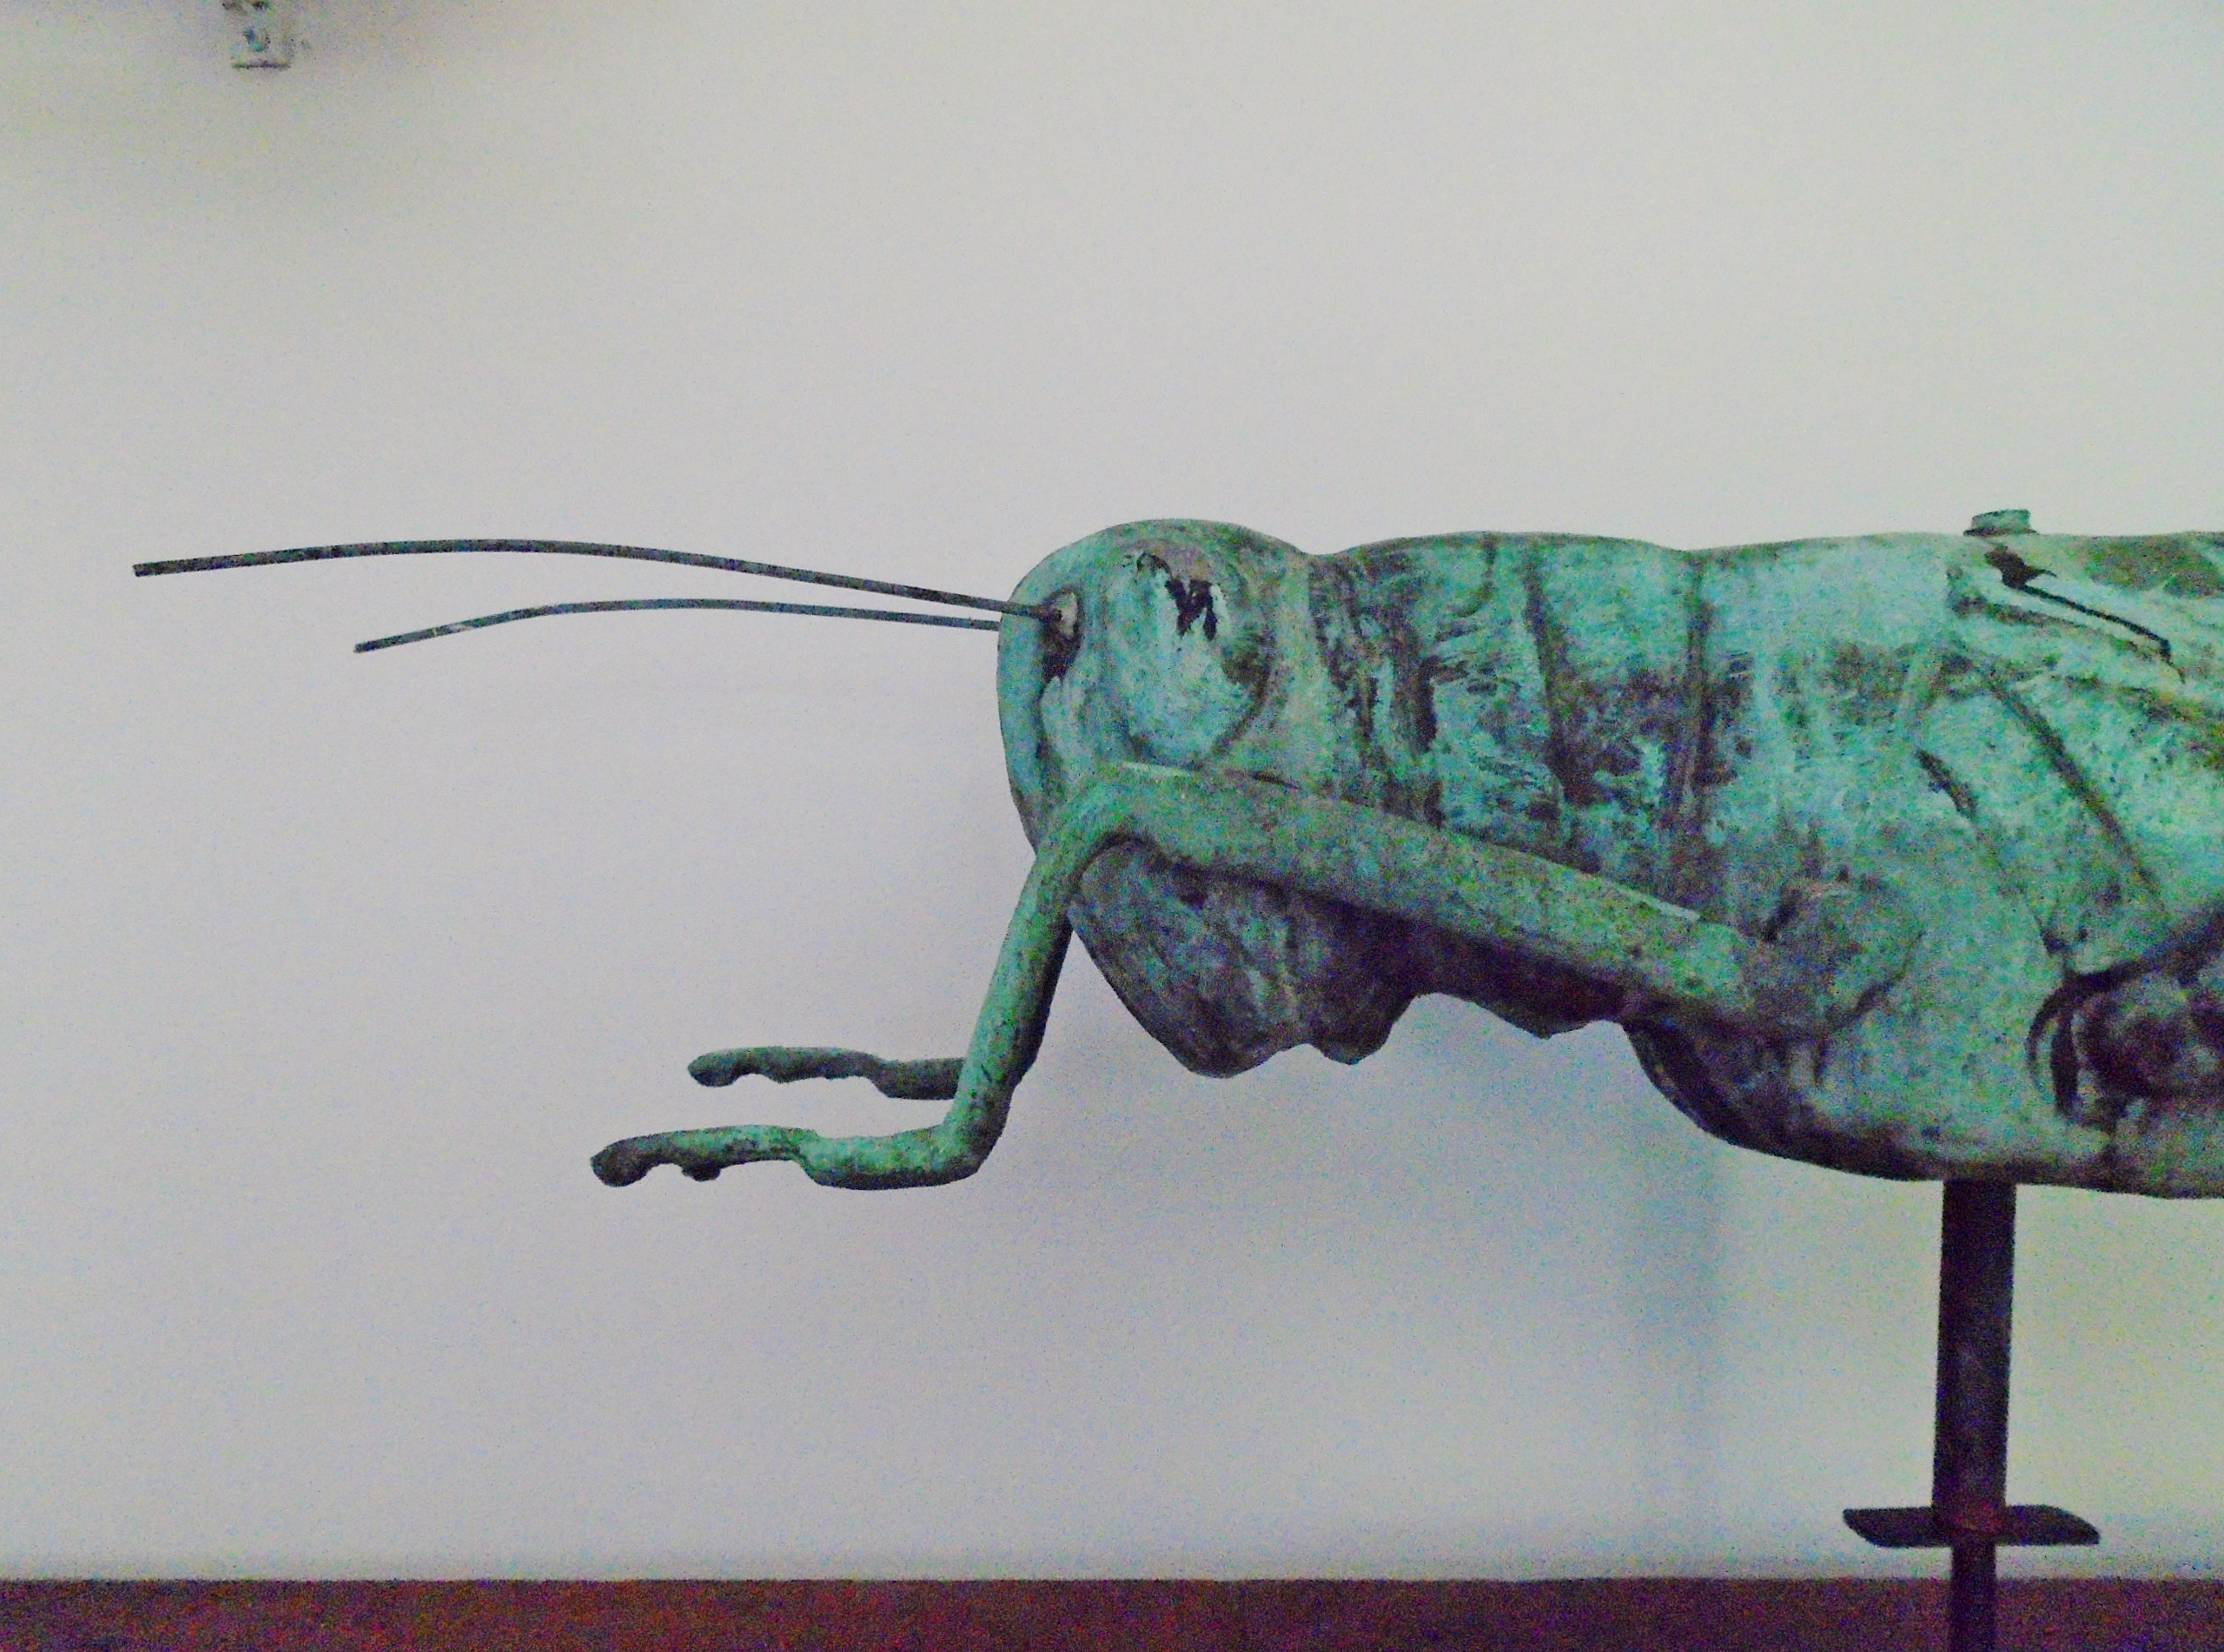 MOLDED COPPER GRASSHOPPER IN OLD SURFACE